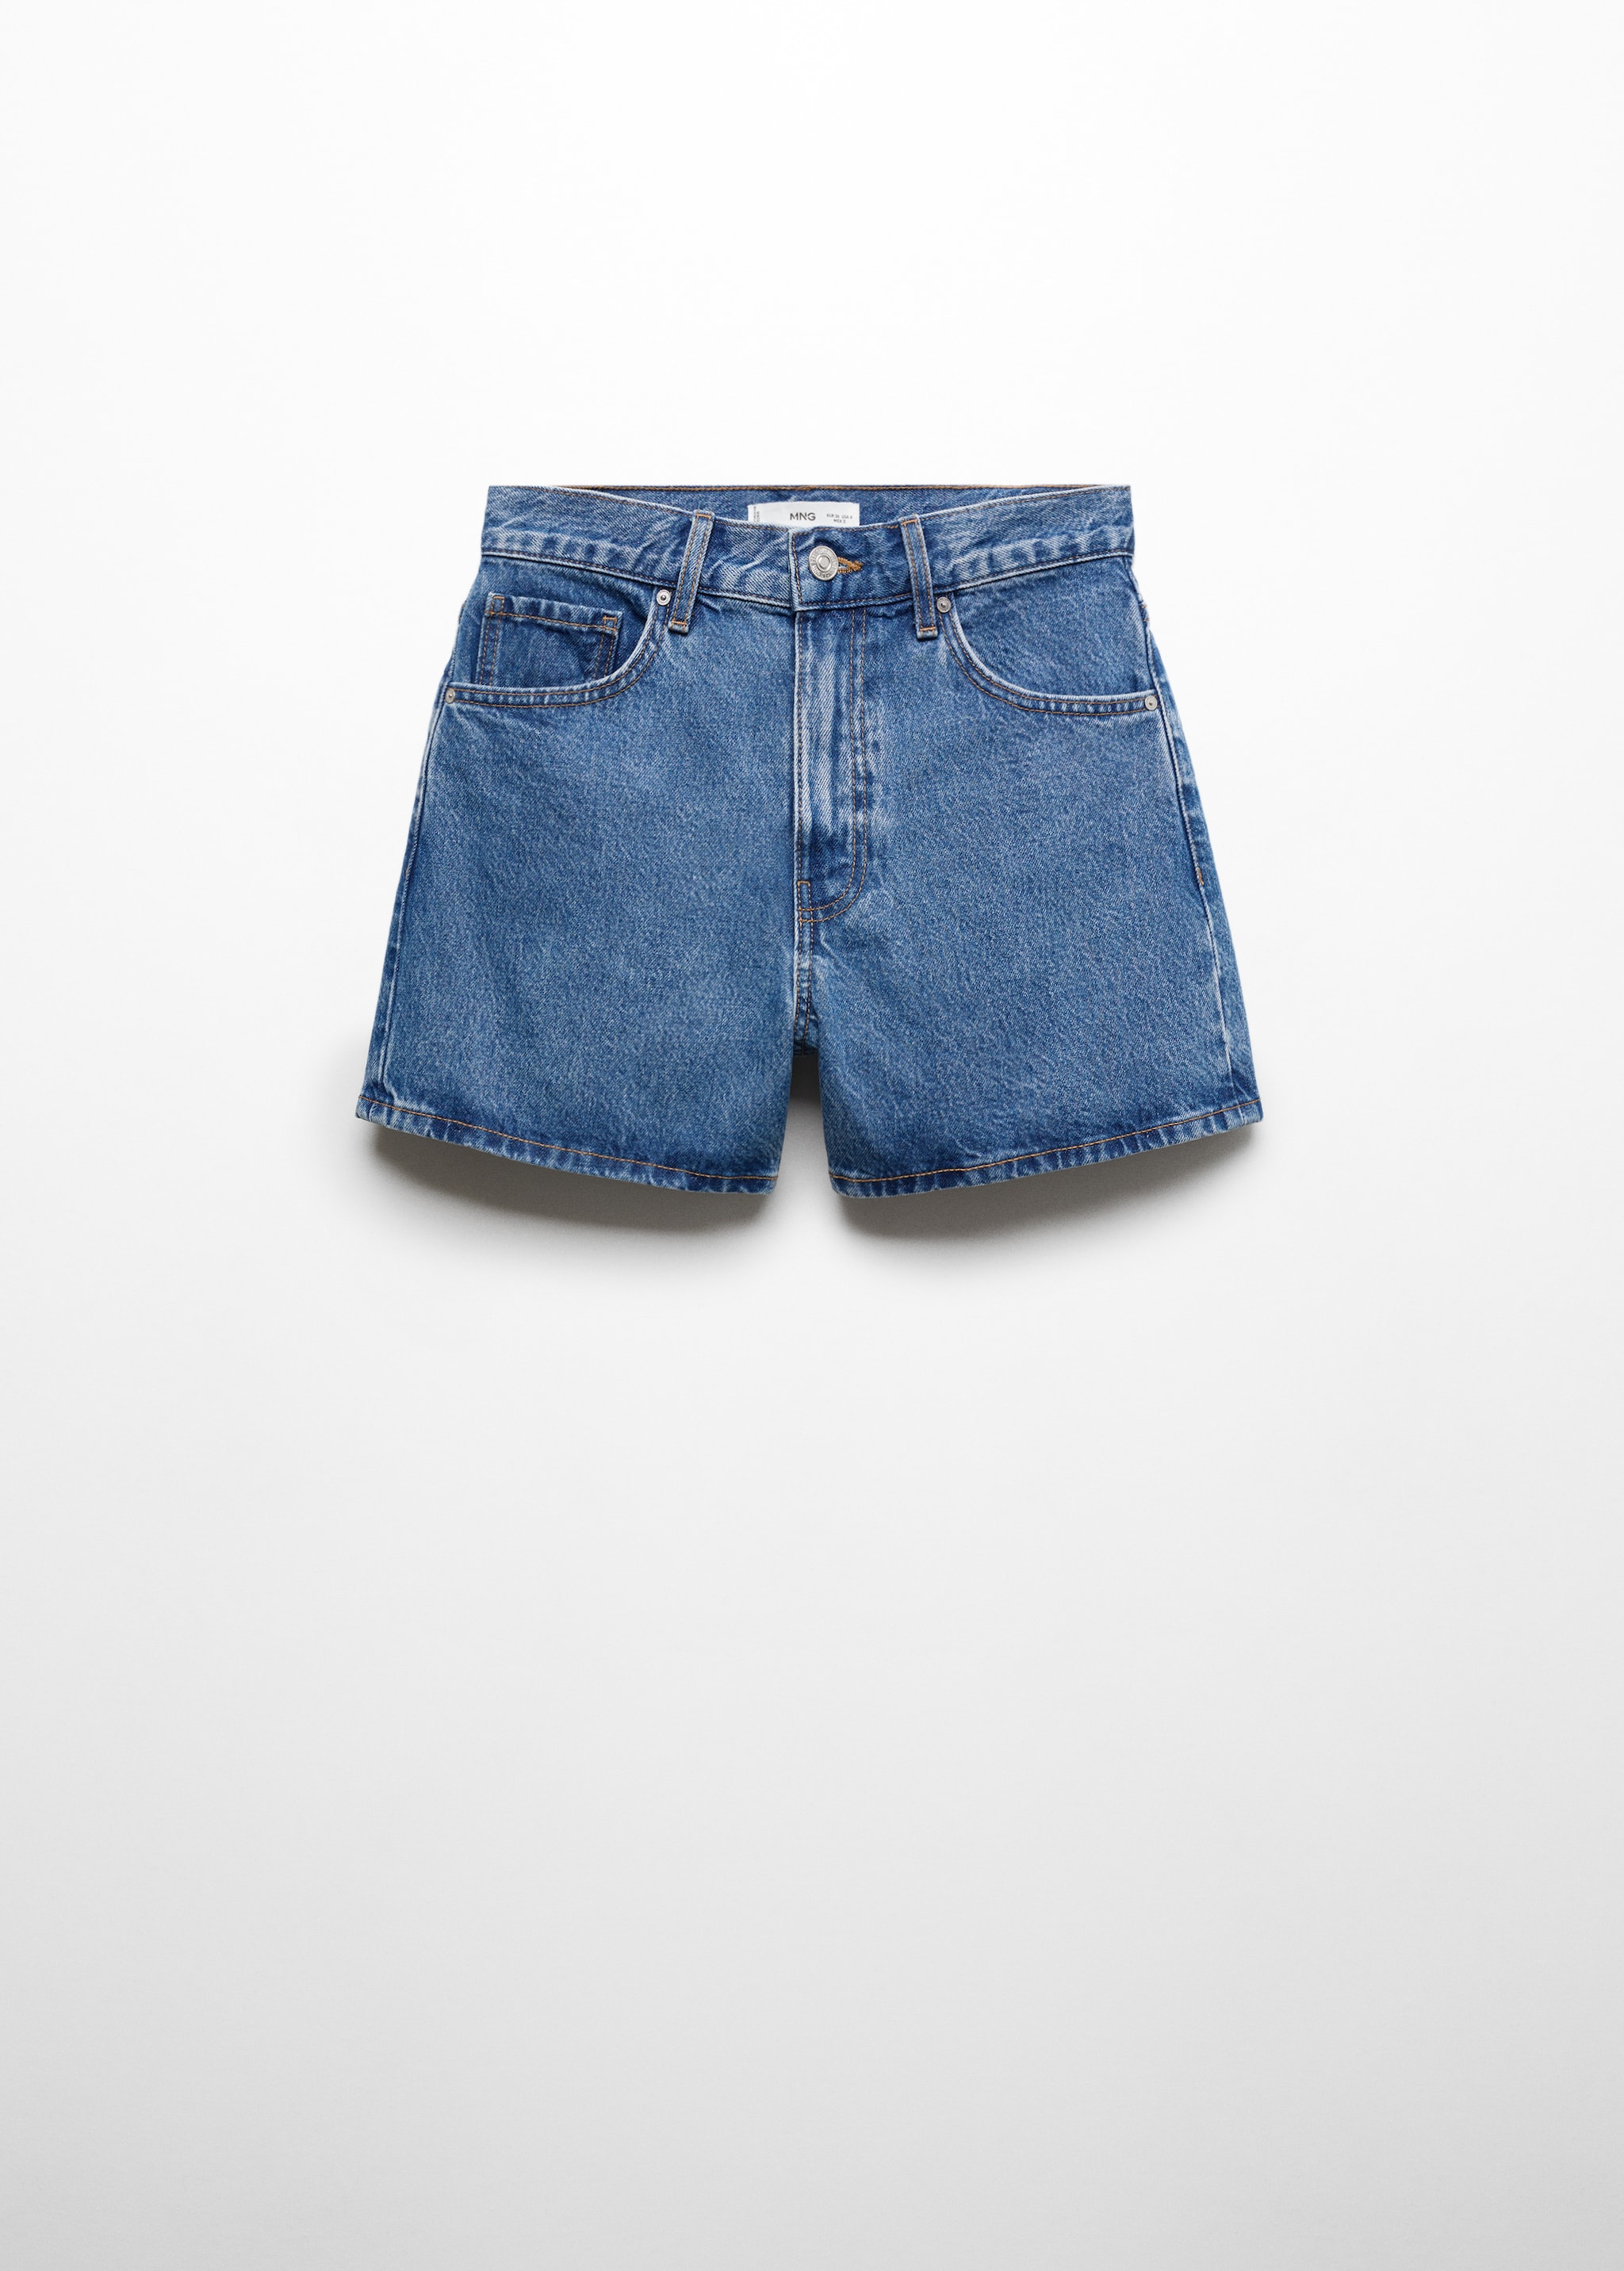 High-rise denim shorts - Article without model